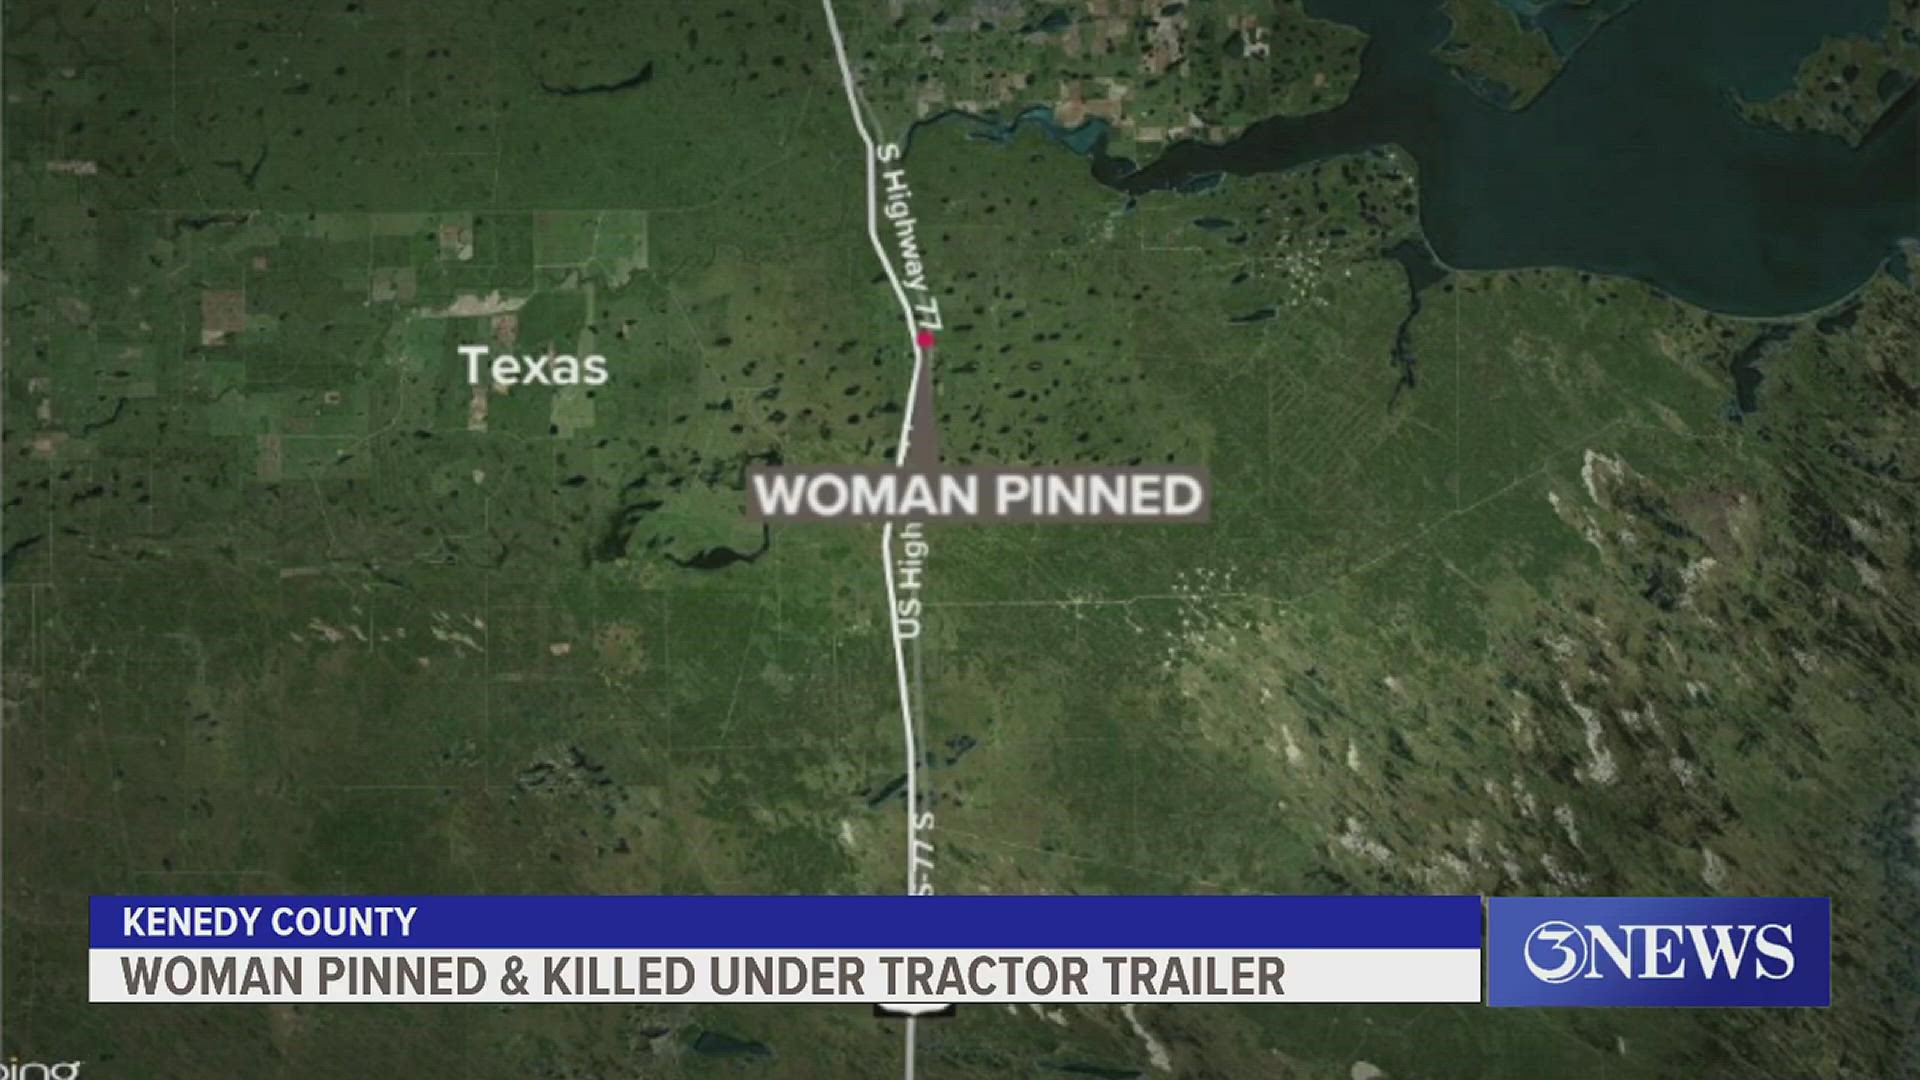 The driver did not notice the woman was underneath the trailer and continued traveling. DPS officials said the passenger was then pinned underneath the trailer.